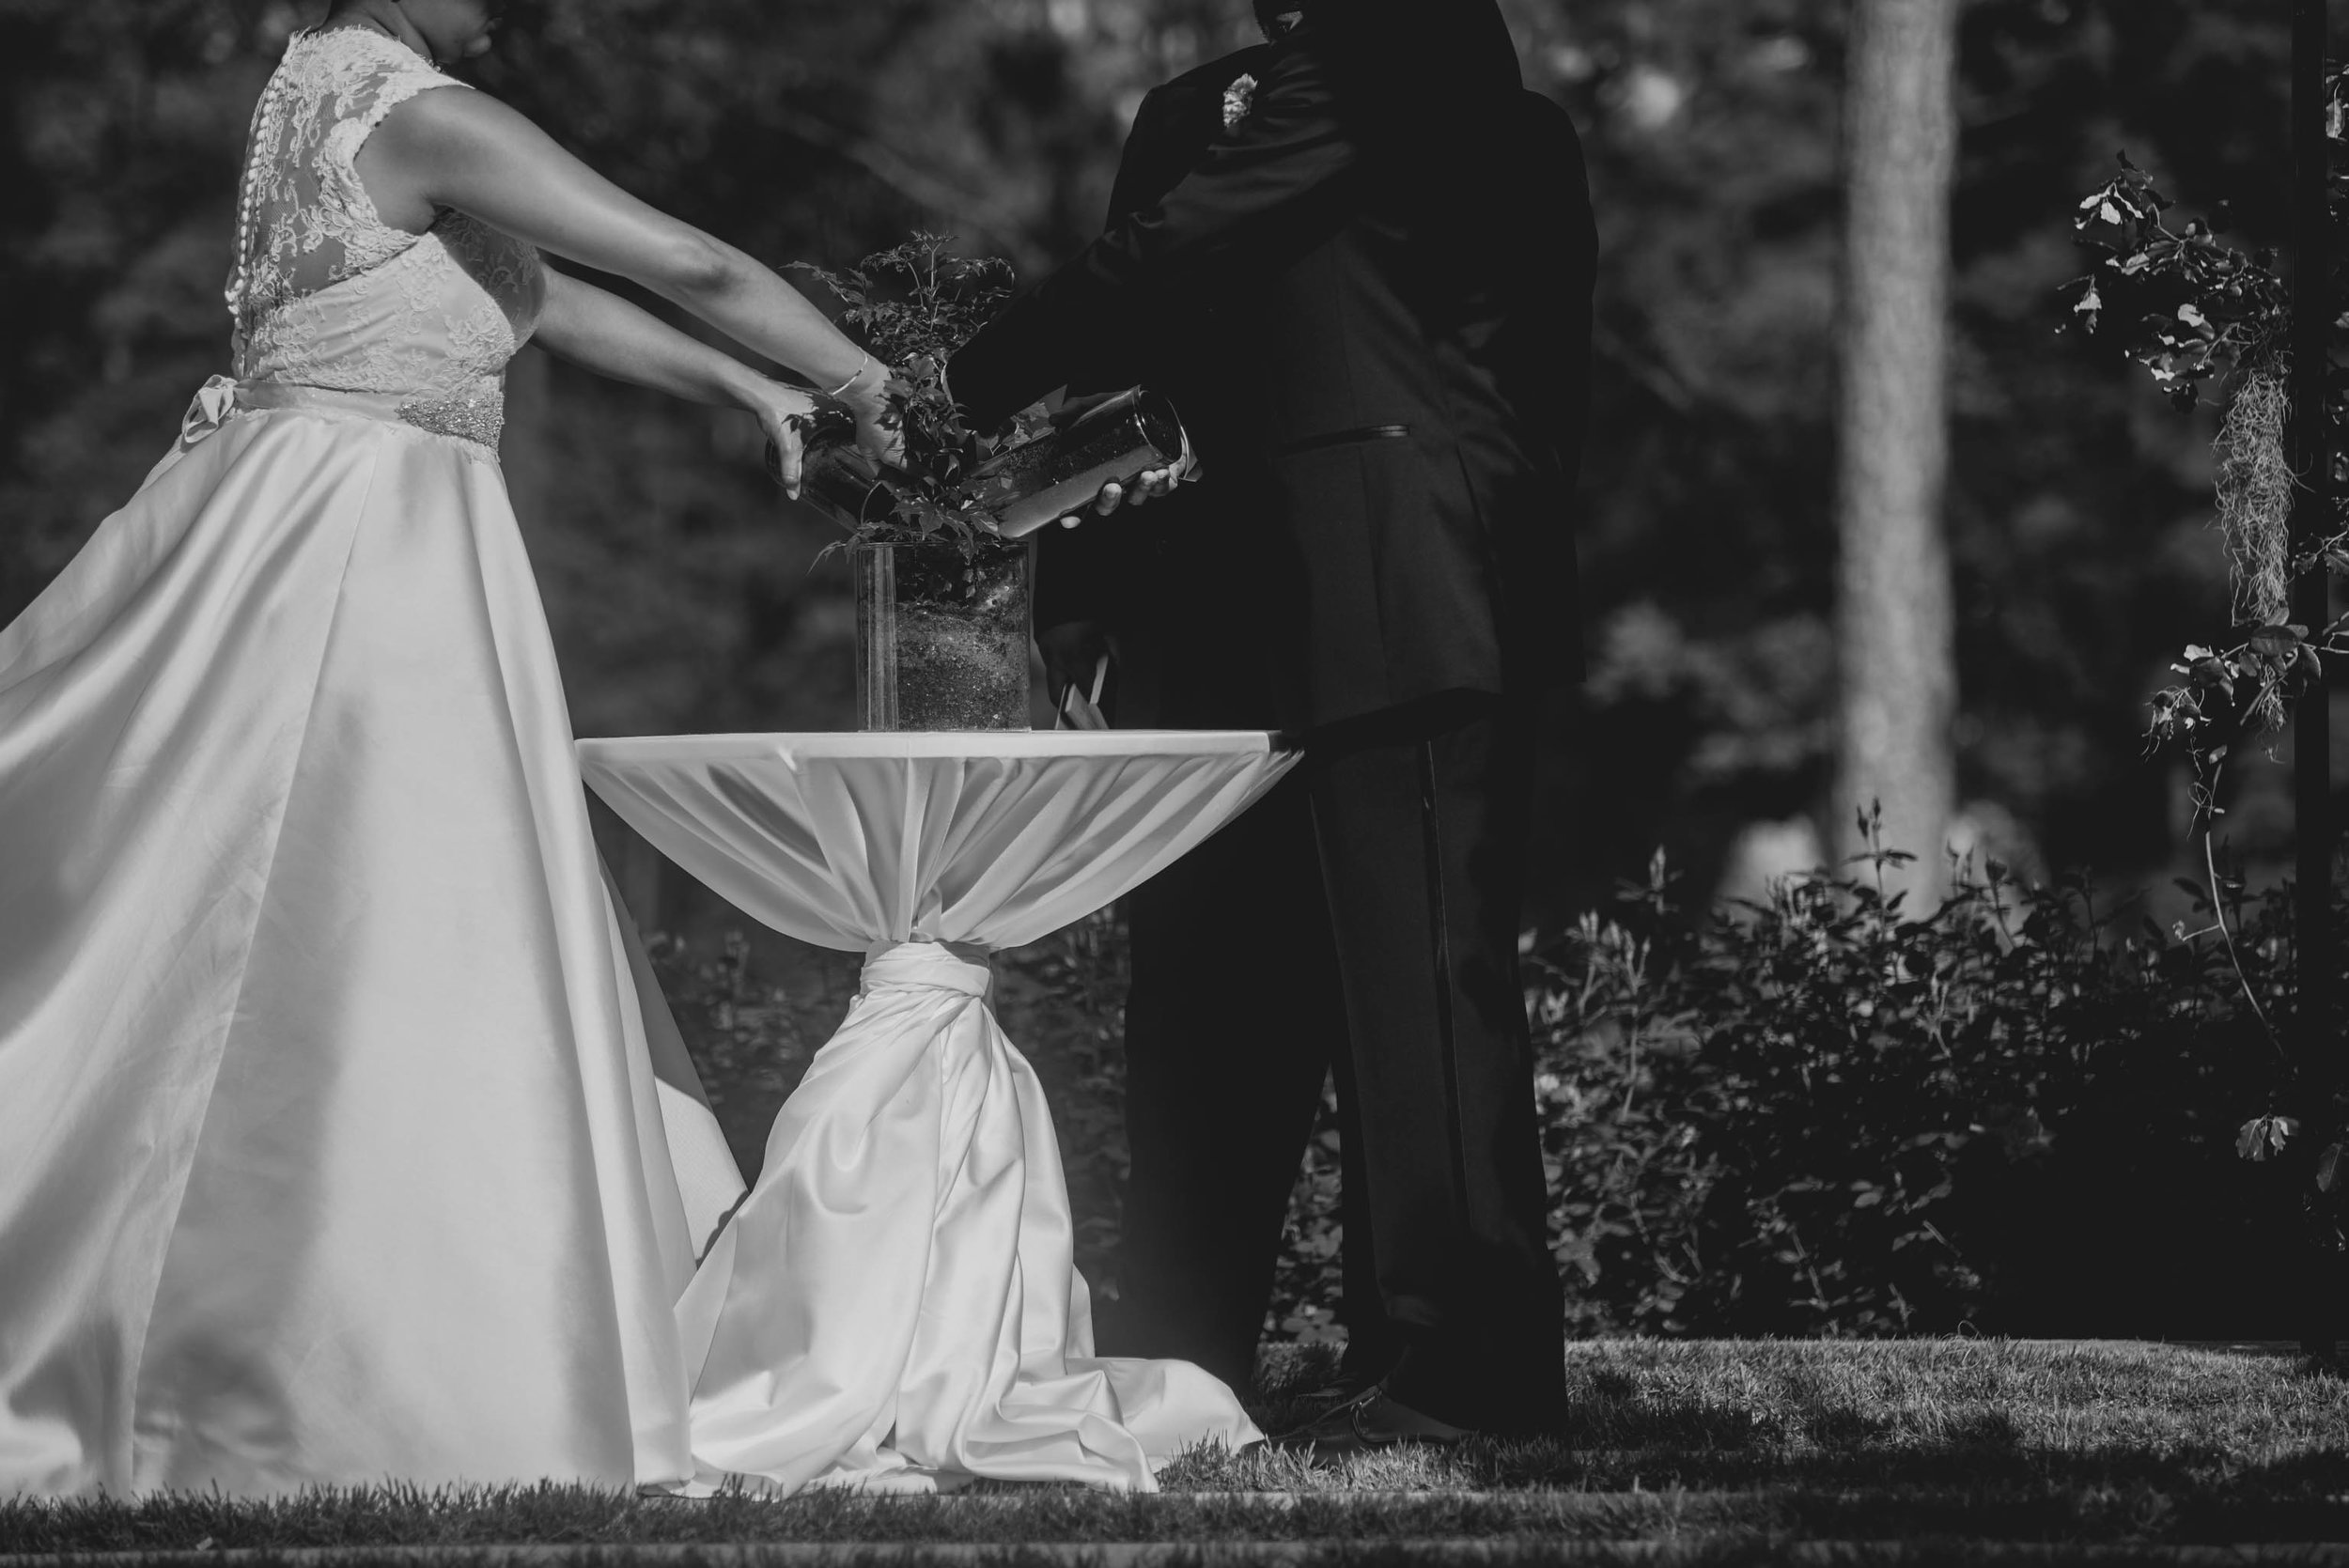 The bride and Groom participating in a tree planting ceremony during their wedding ceremony at the Umstead Hotel and Spa